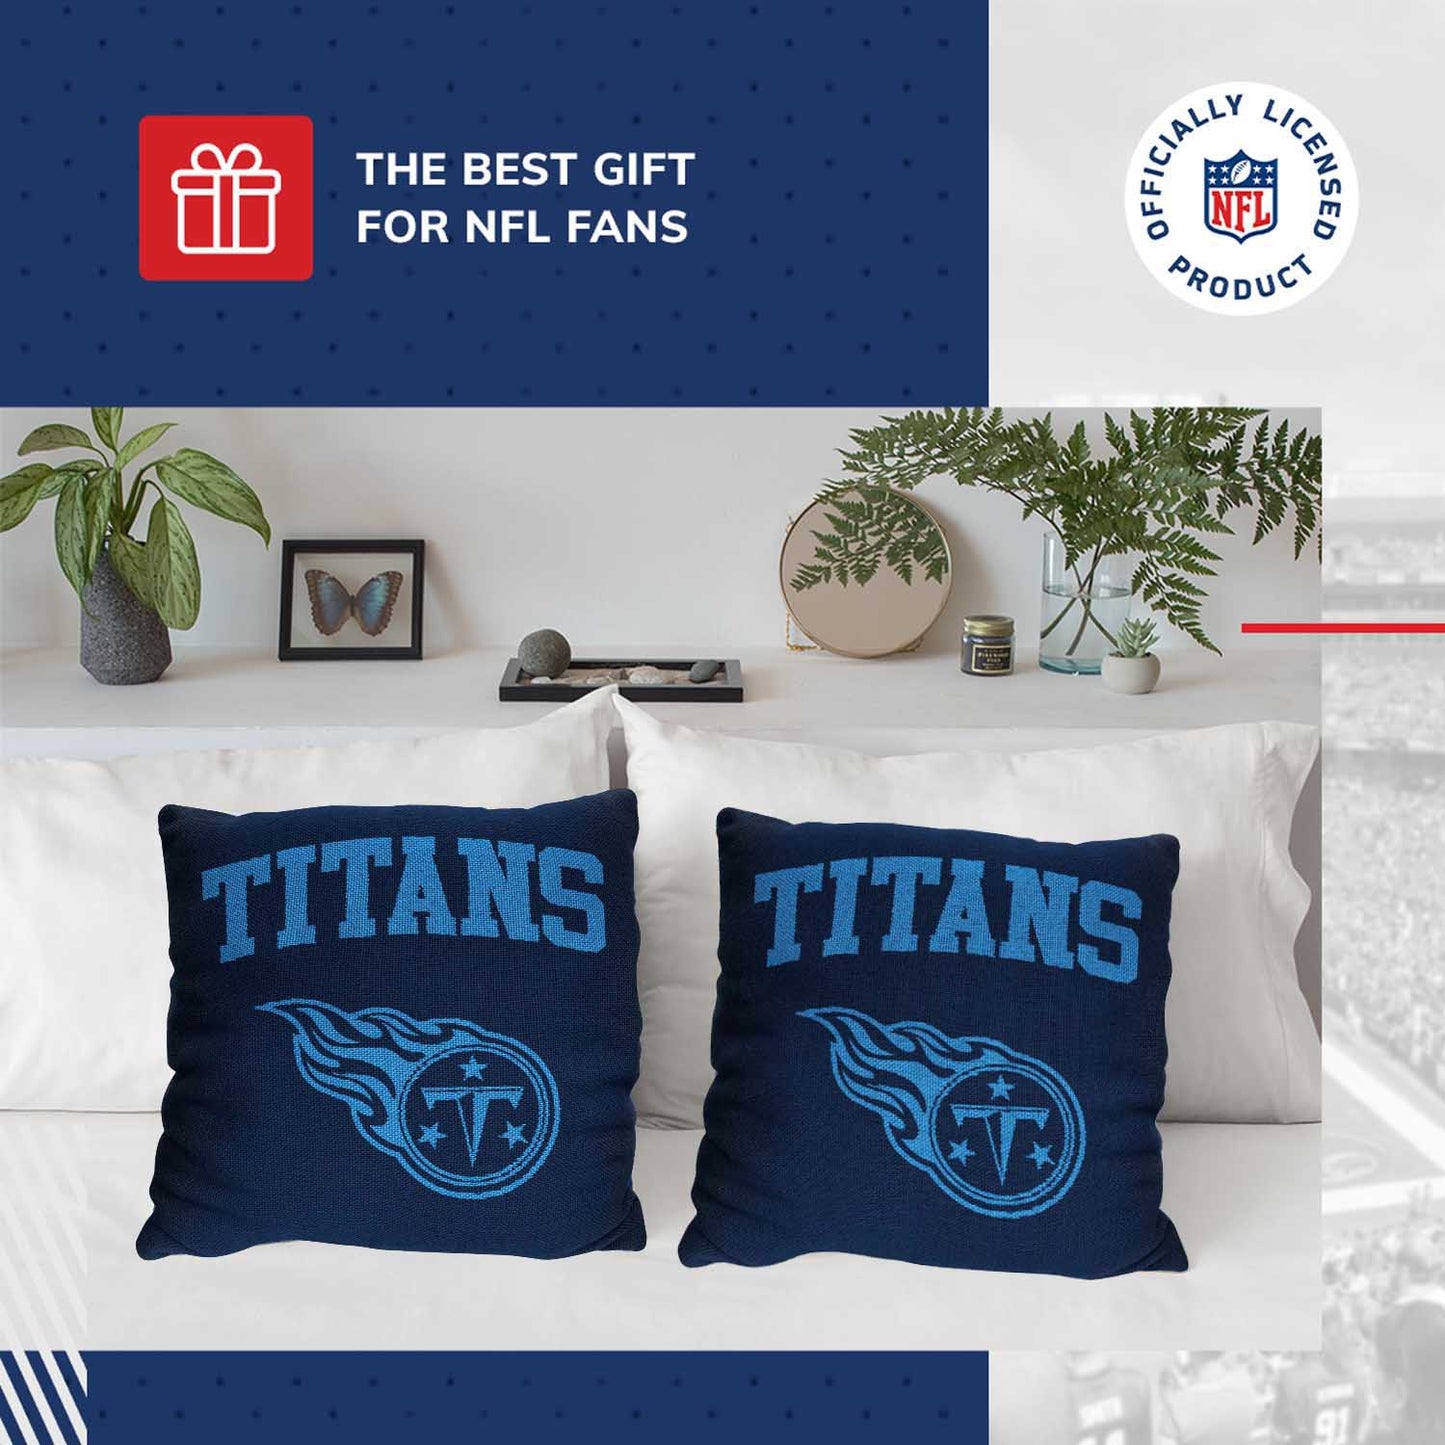 Tennessee Titans NFL Decorative Football Throw Pillow - Navy